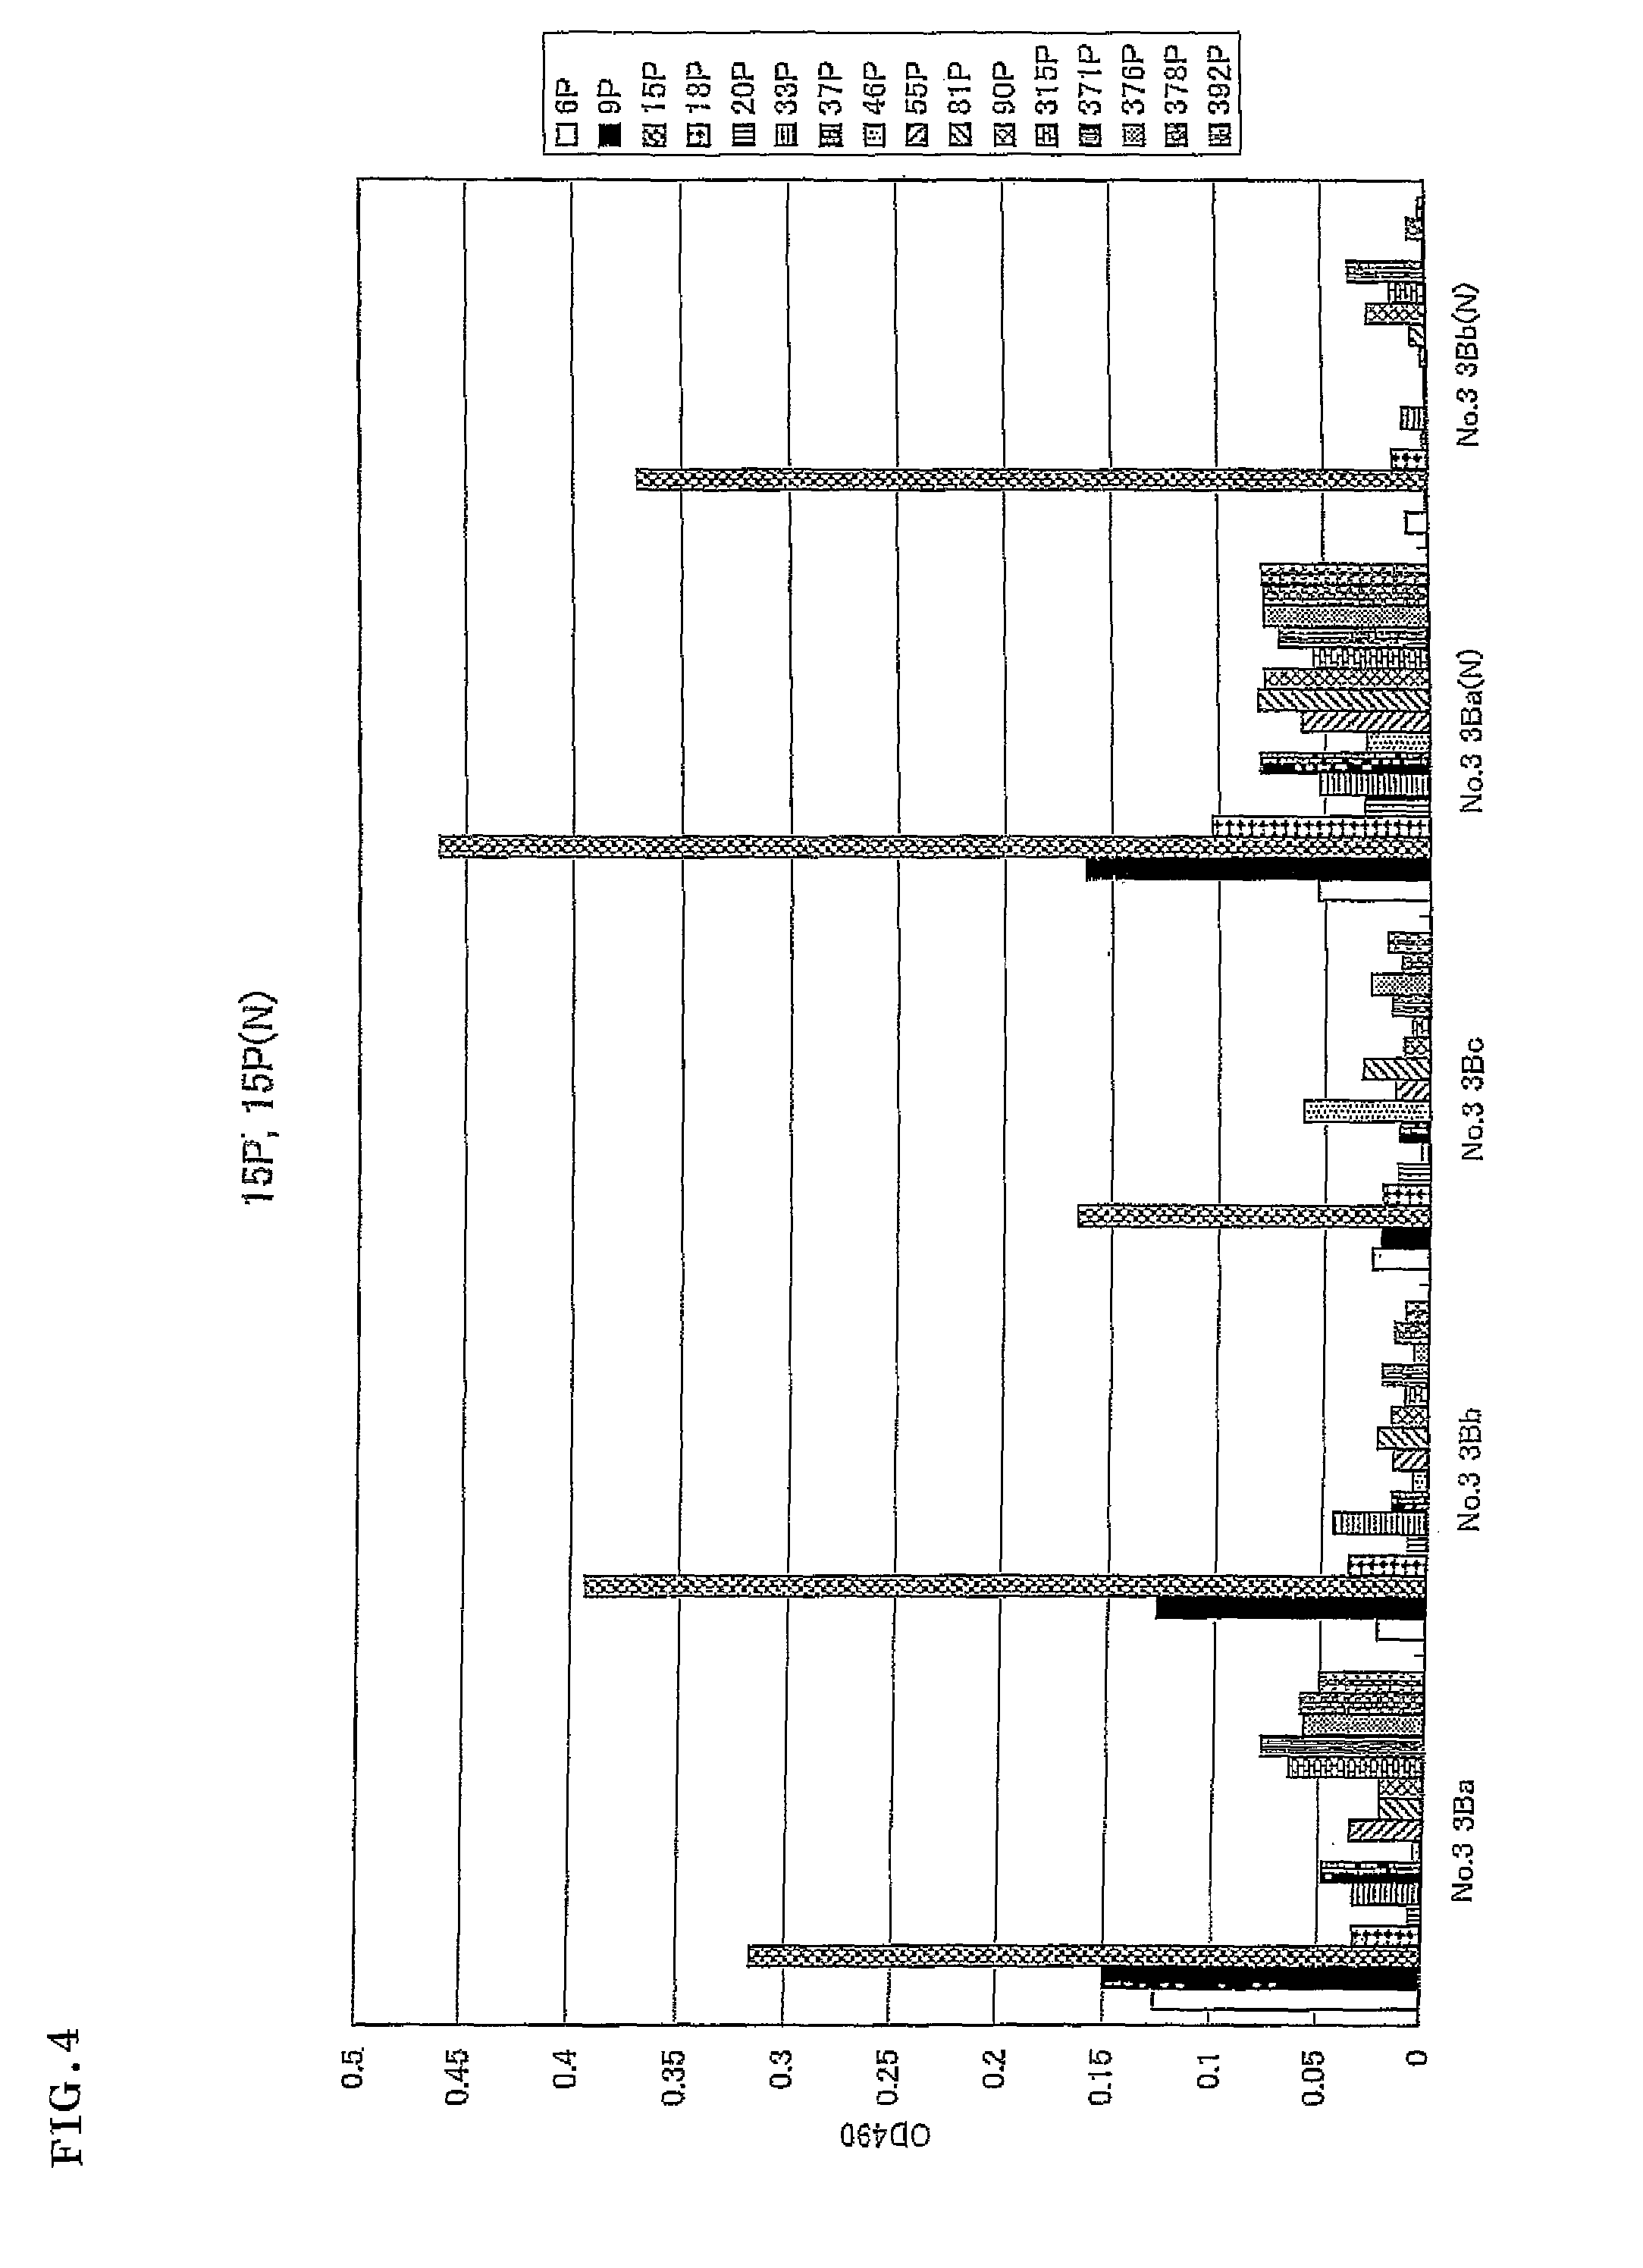 Monoclonal antibody specifically recognizing modification site after translation of p53 and kit for assaying modification site containing the same